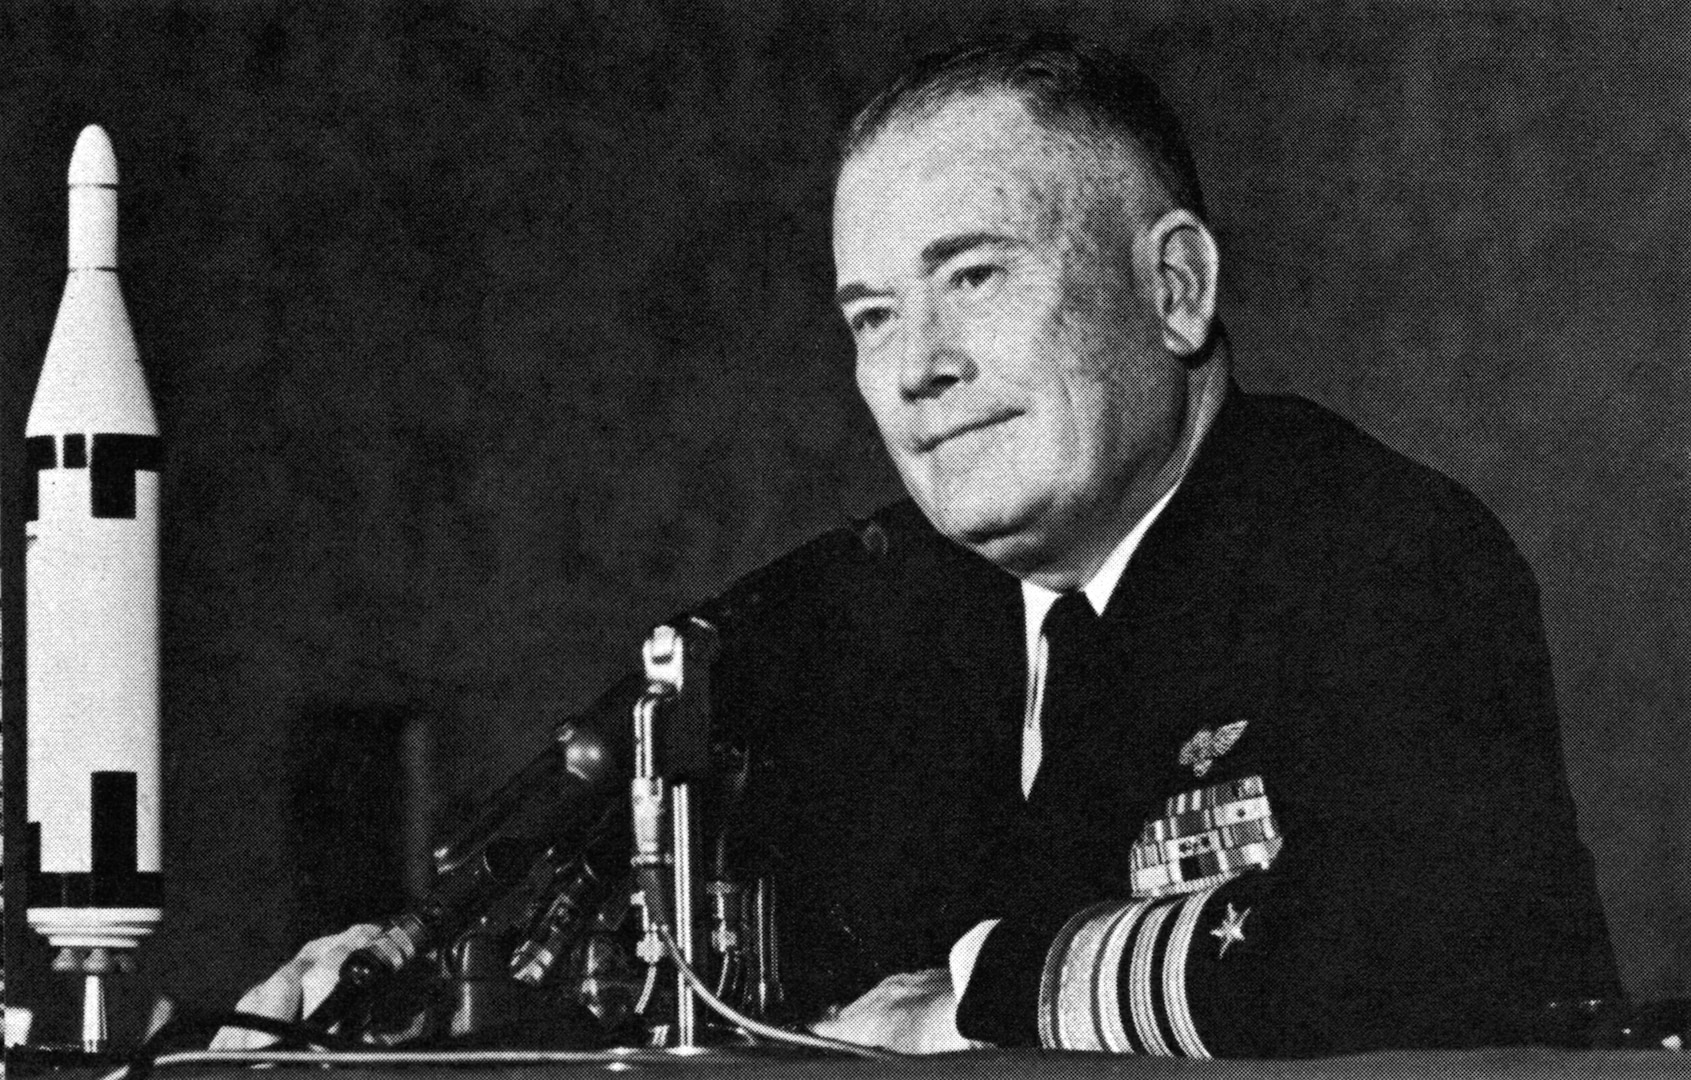 Rear Adm. William F. Raborn, appointed the first director of the Navy Special Projects Office (SPO) in Dec. 1955, answers questions about SPO’s mission and the development of the Polaris A1 missile.